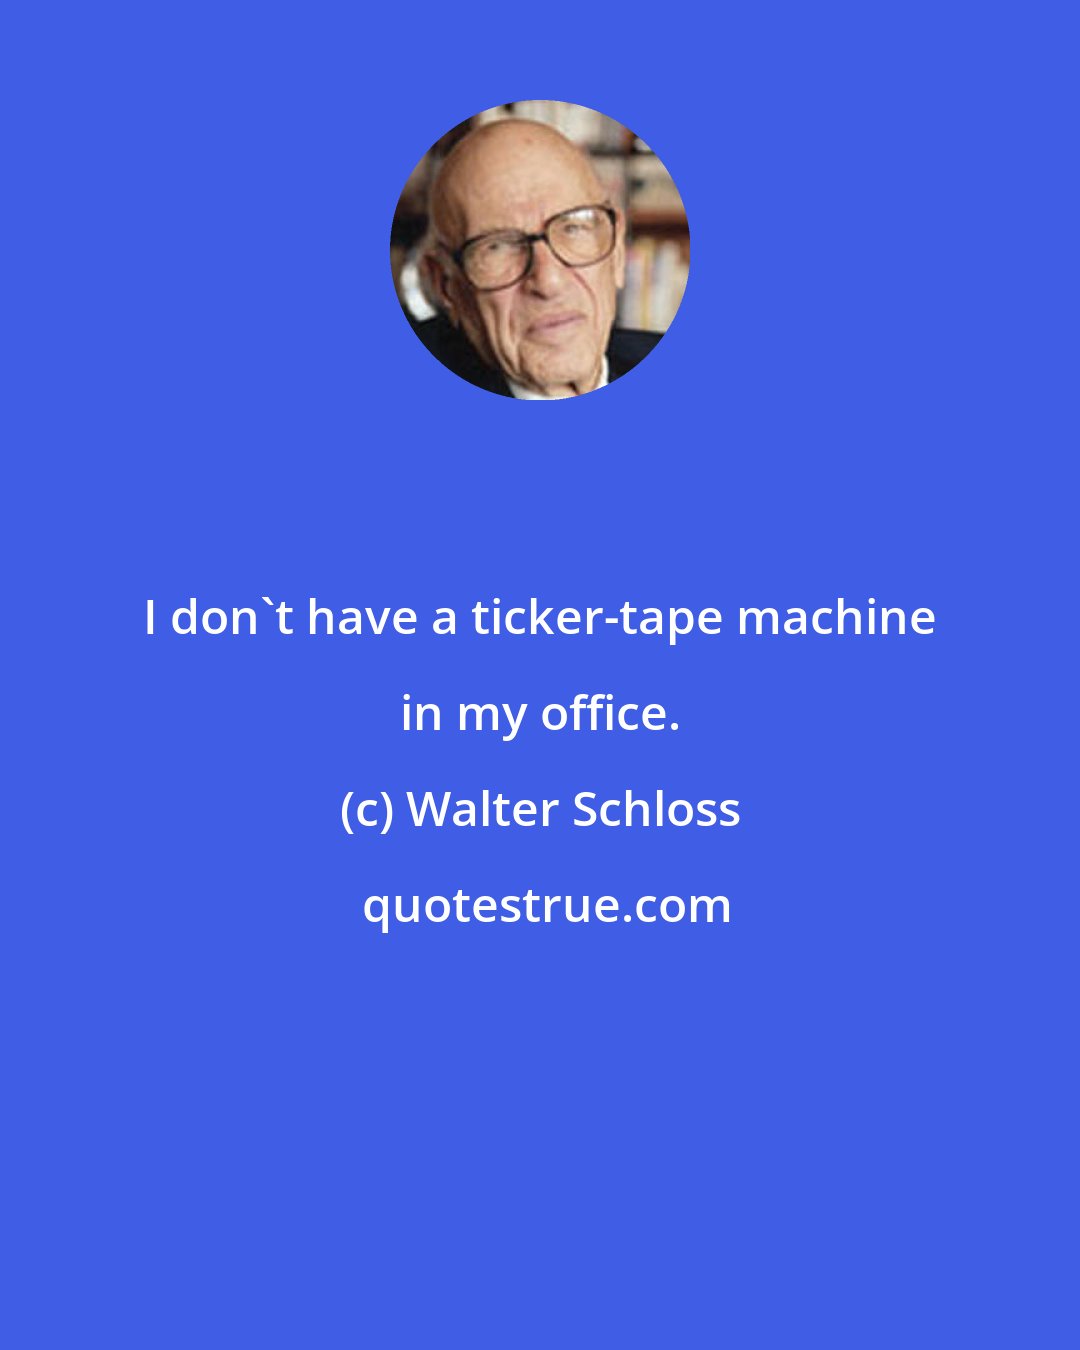 Walter Schloss: I don't have a ticker-tape machine in my office.